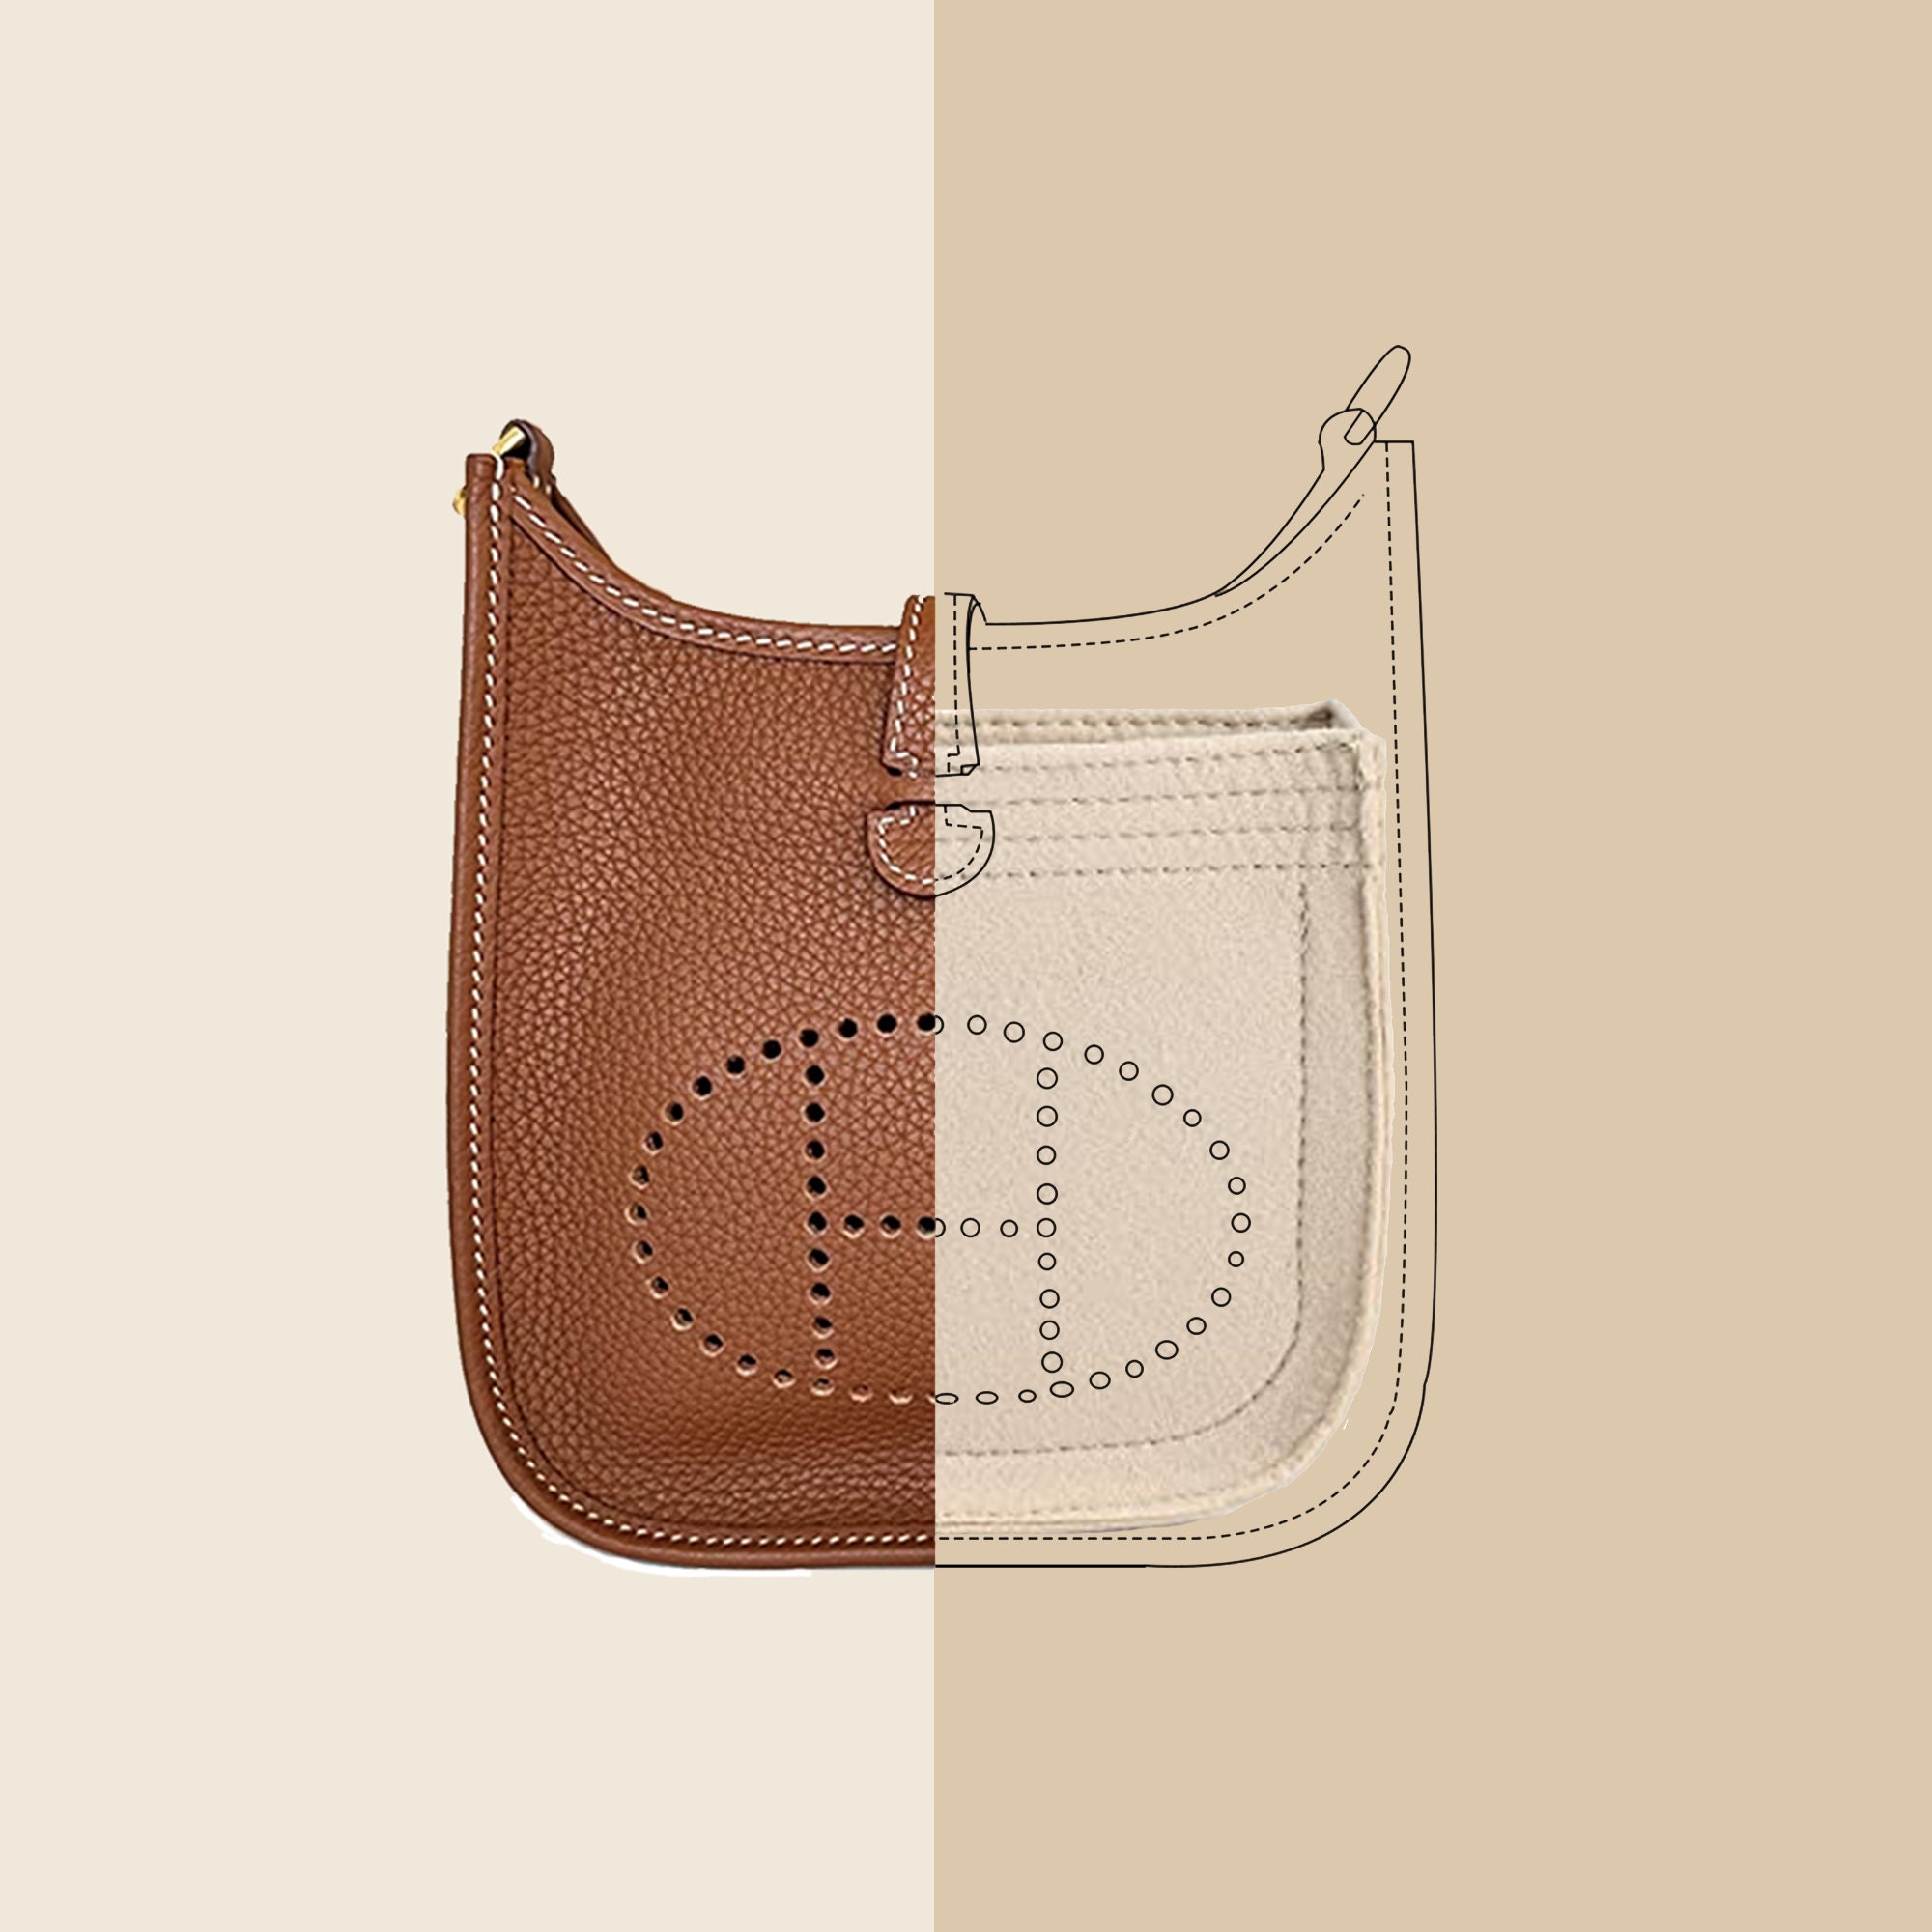 The Hermès Evelyne Bag: Casual Functional Crossbody, Handbags and  Accessories